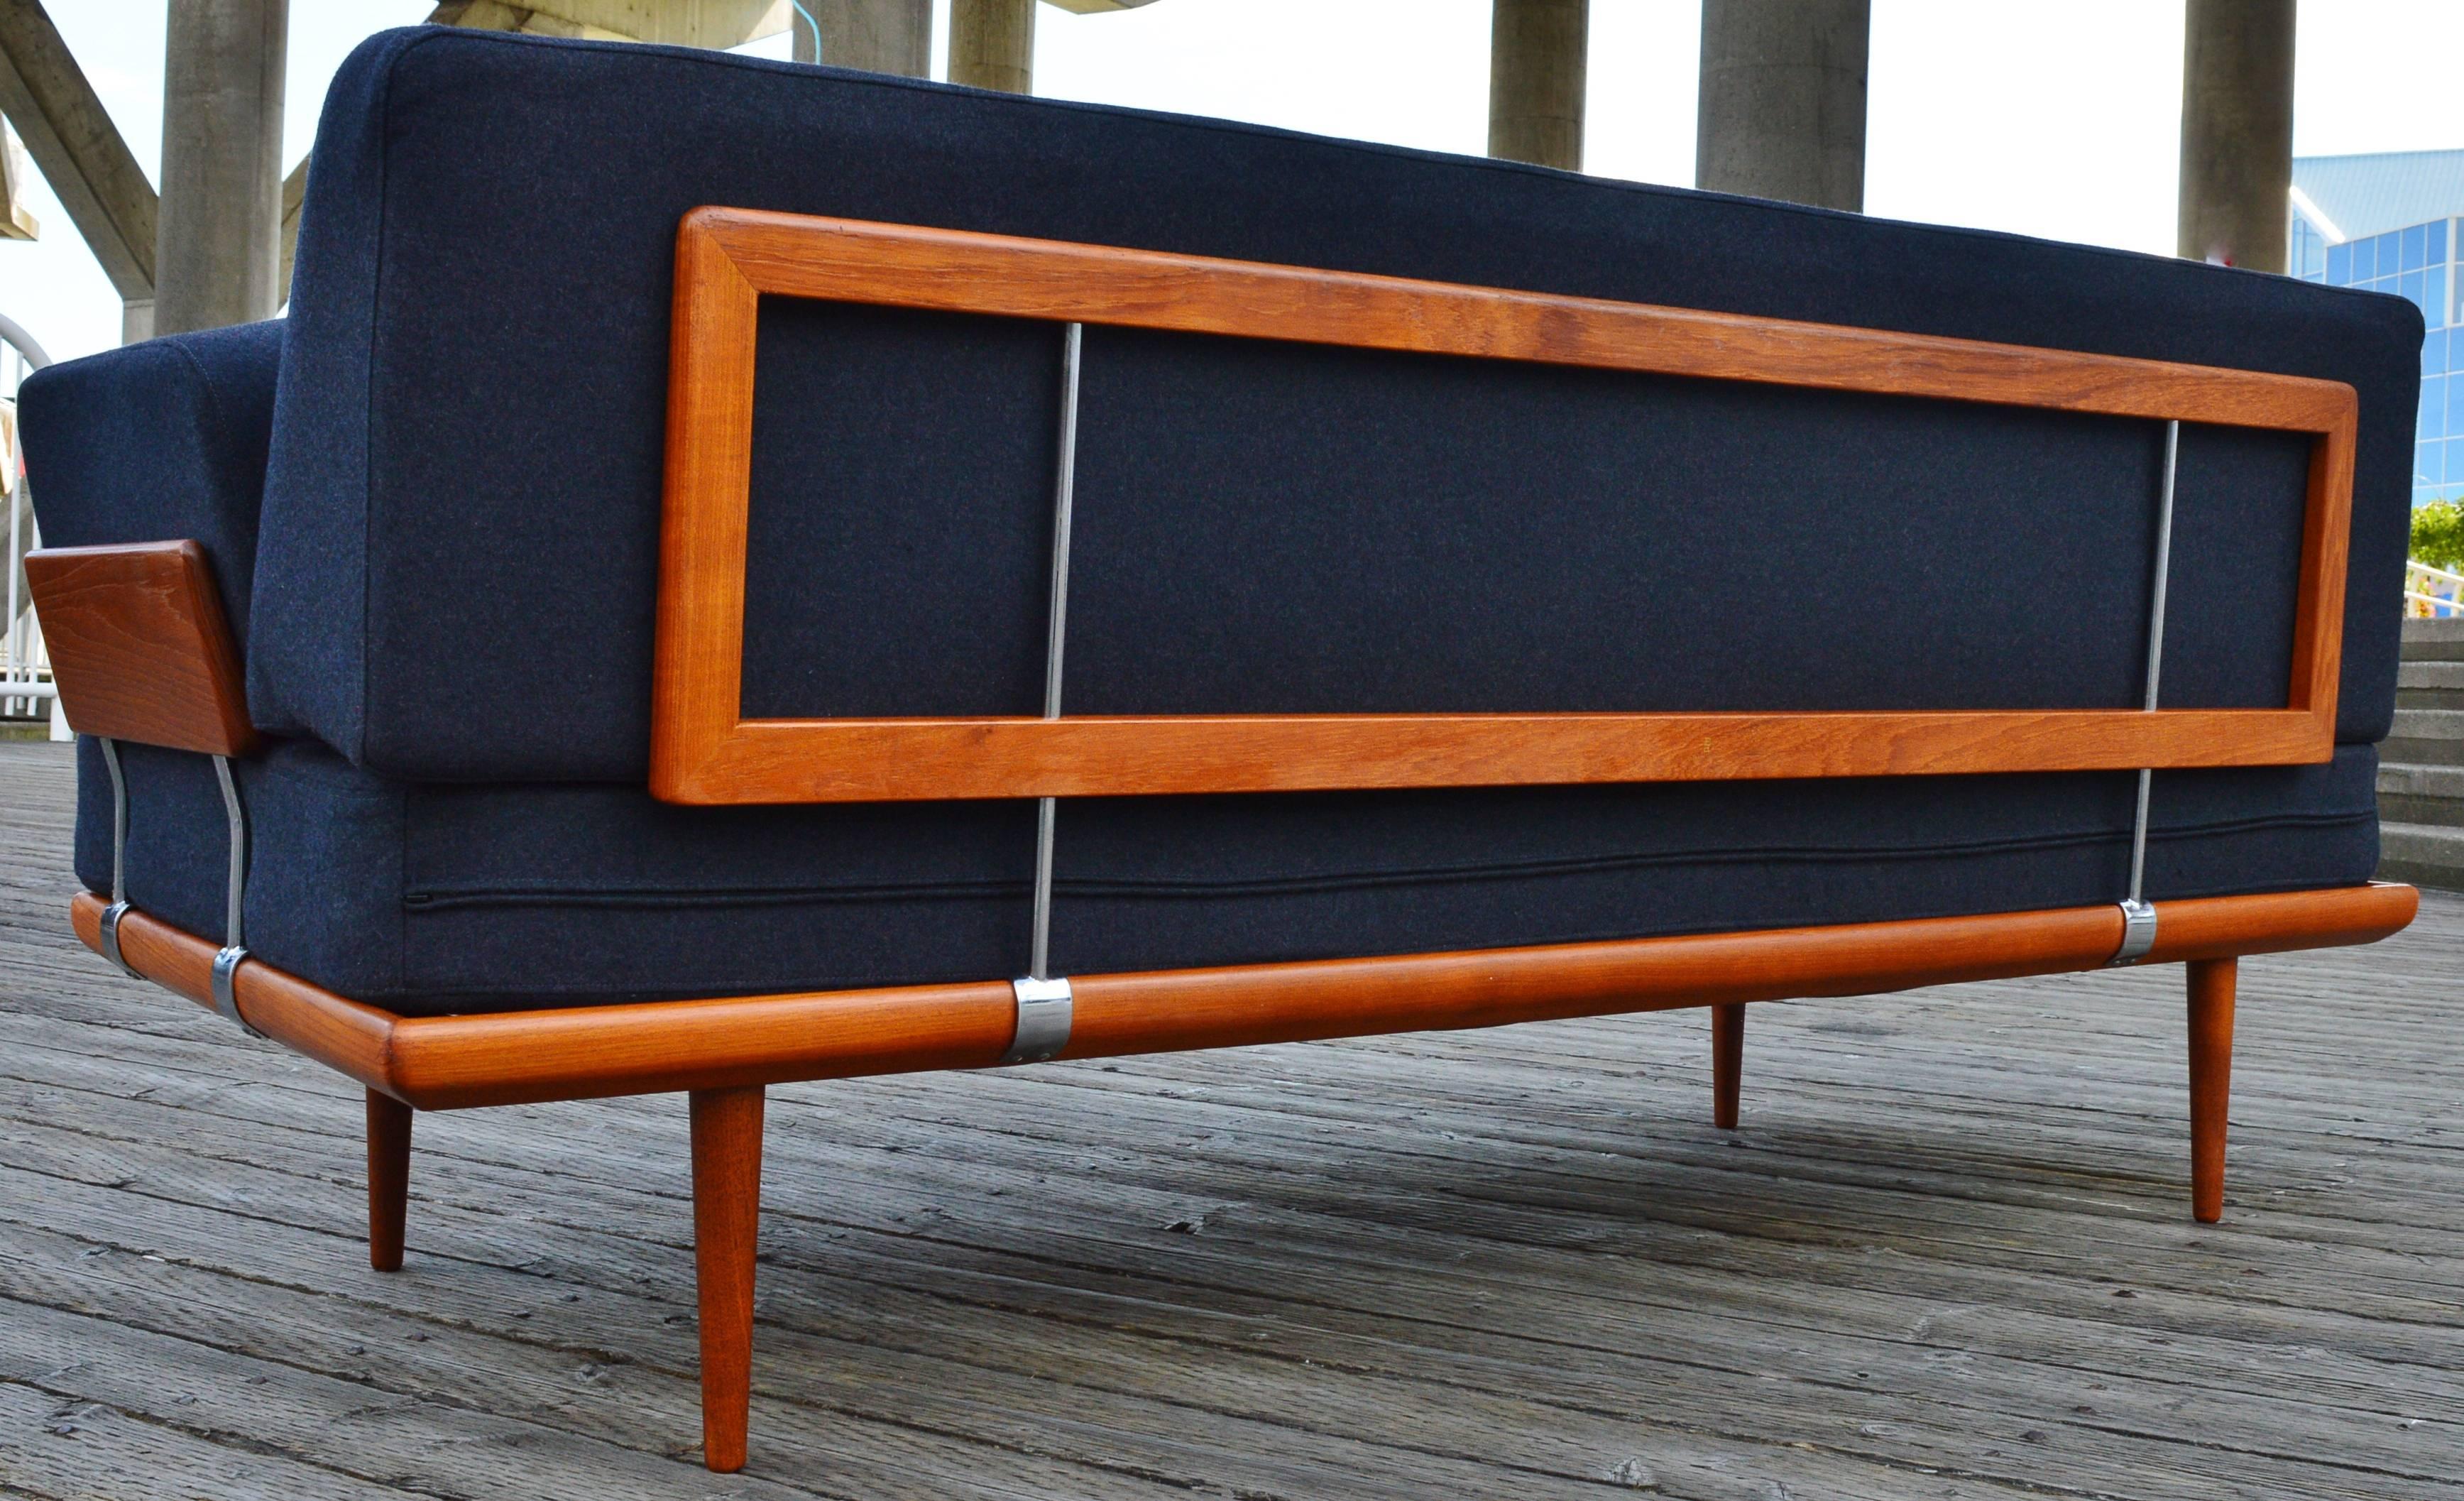 This striking Danish modern teak Minerva daybed was designed by Peter Hvidt & Orla Mølgaard-Nielsen for France & Sons and is the rare version with the teak armrests, as well as the original coil spring inserts in all the cushions that makes for